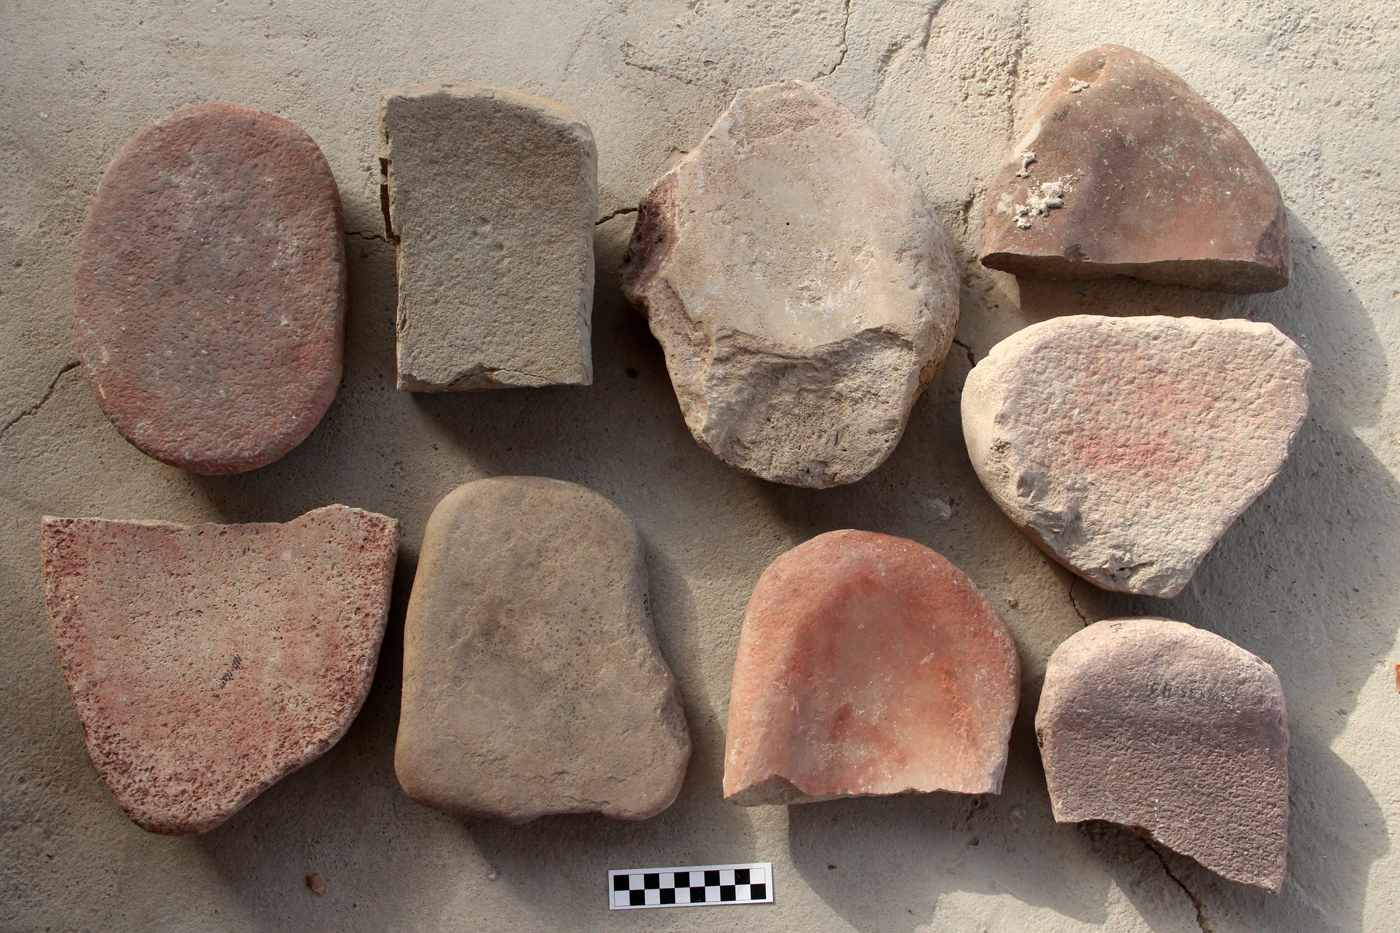 Grinding stones, several of which show traces of ocher